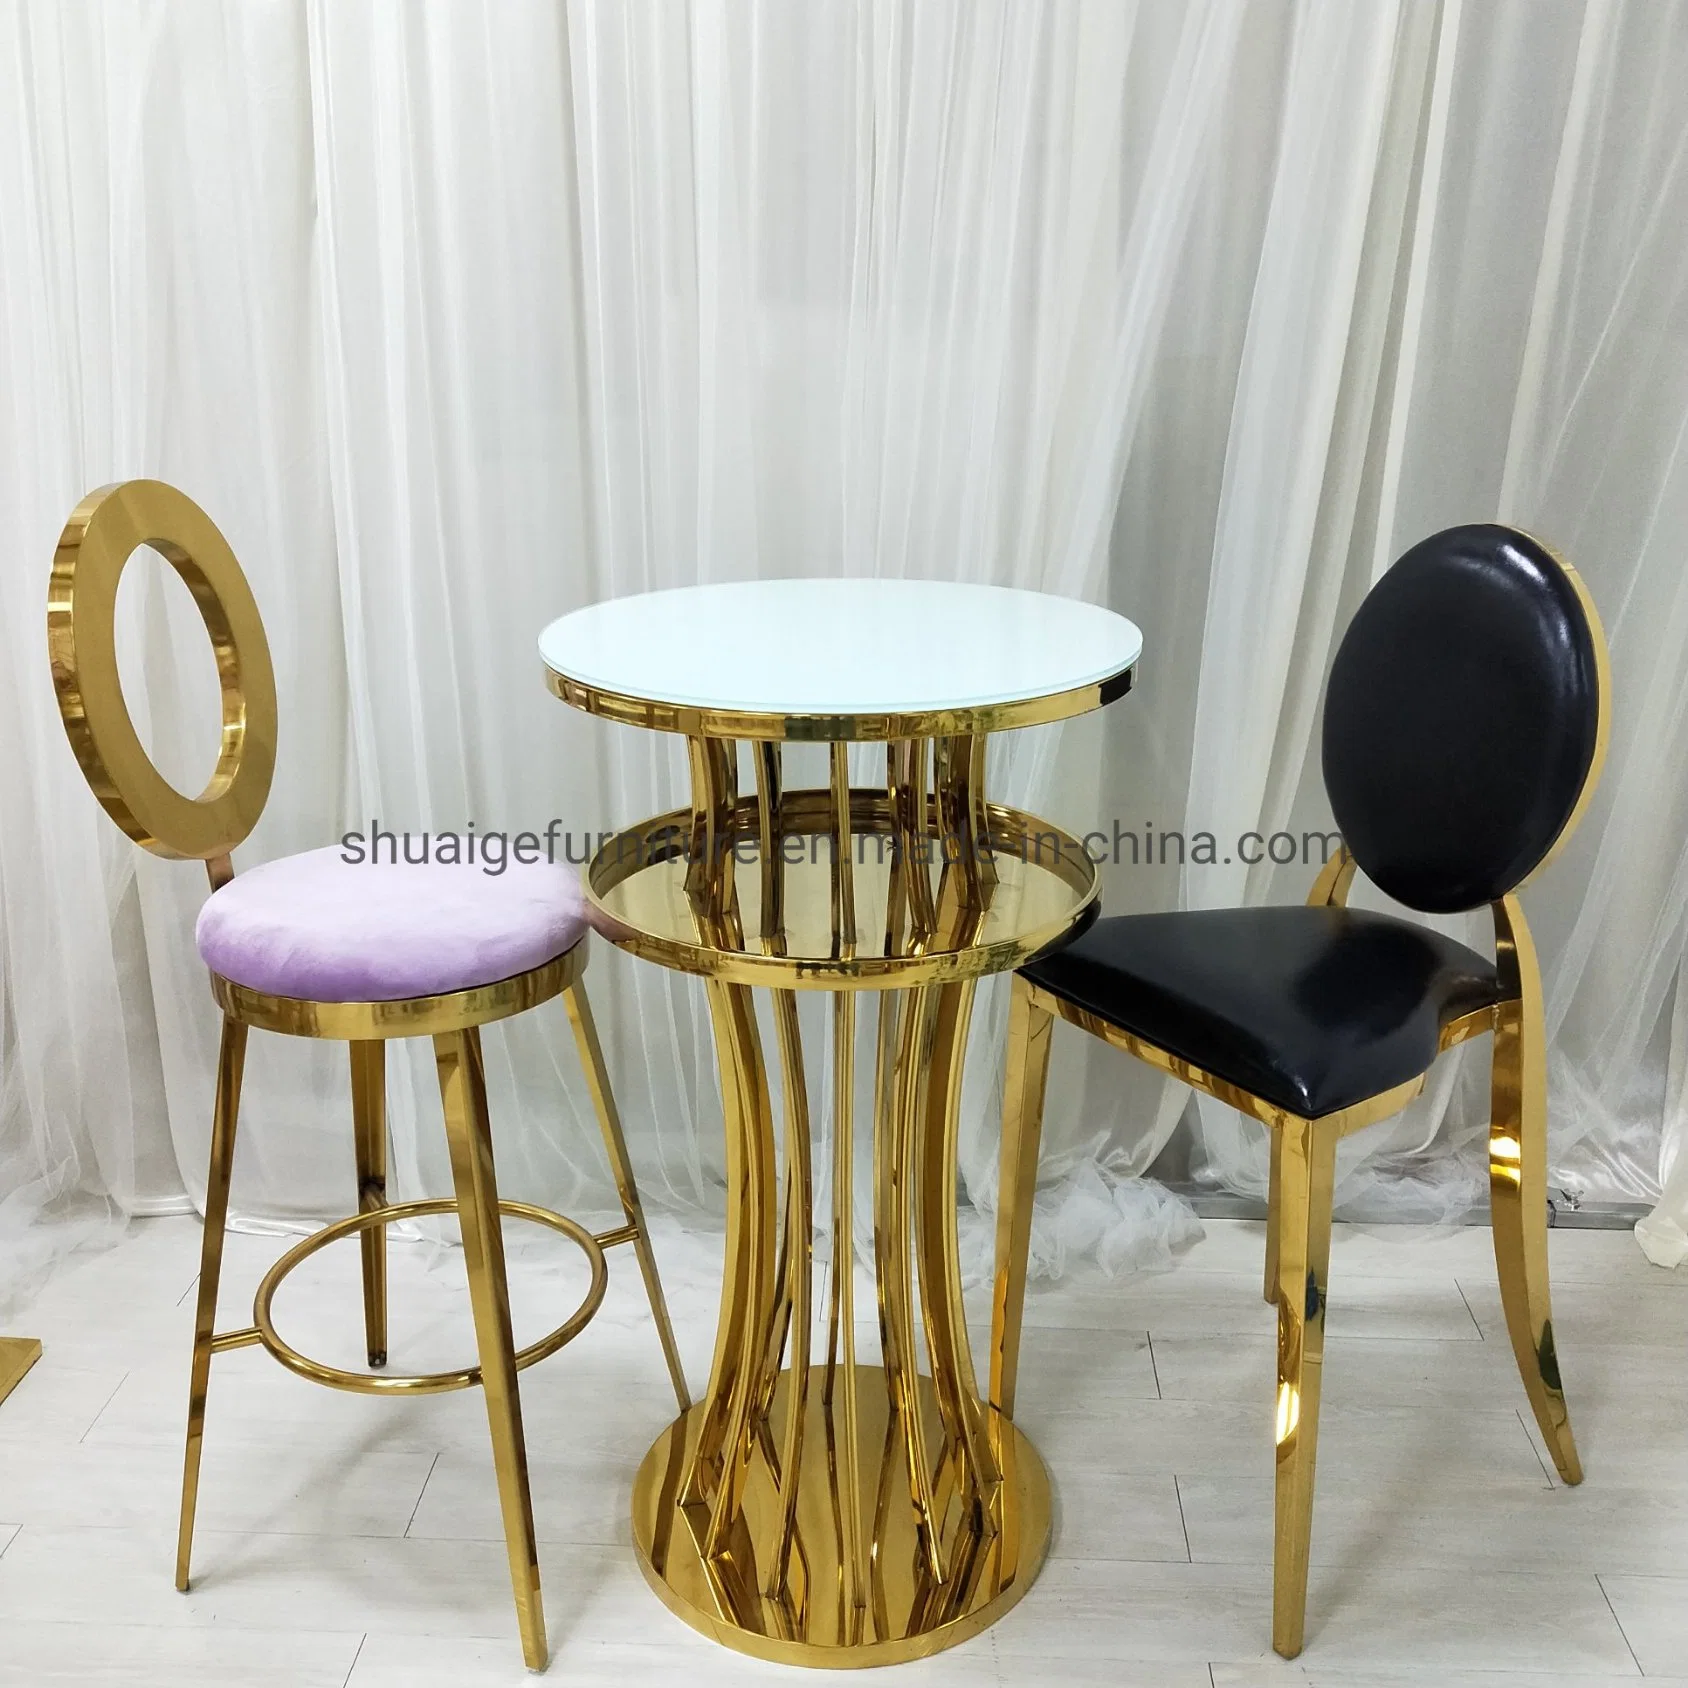 Luxury Banquet Wedding Gold Stainless Steel Bar Table